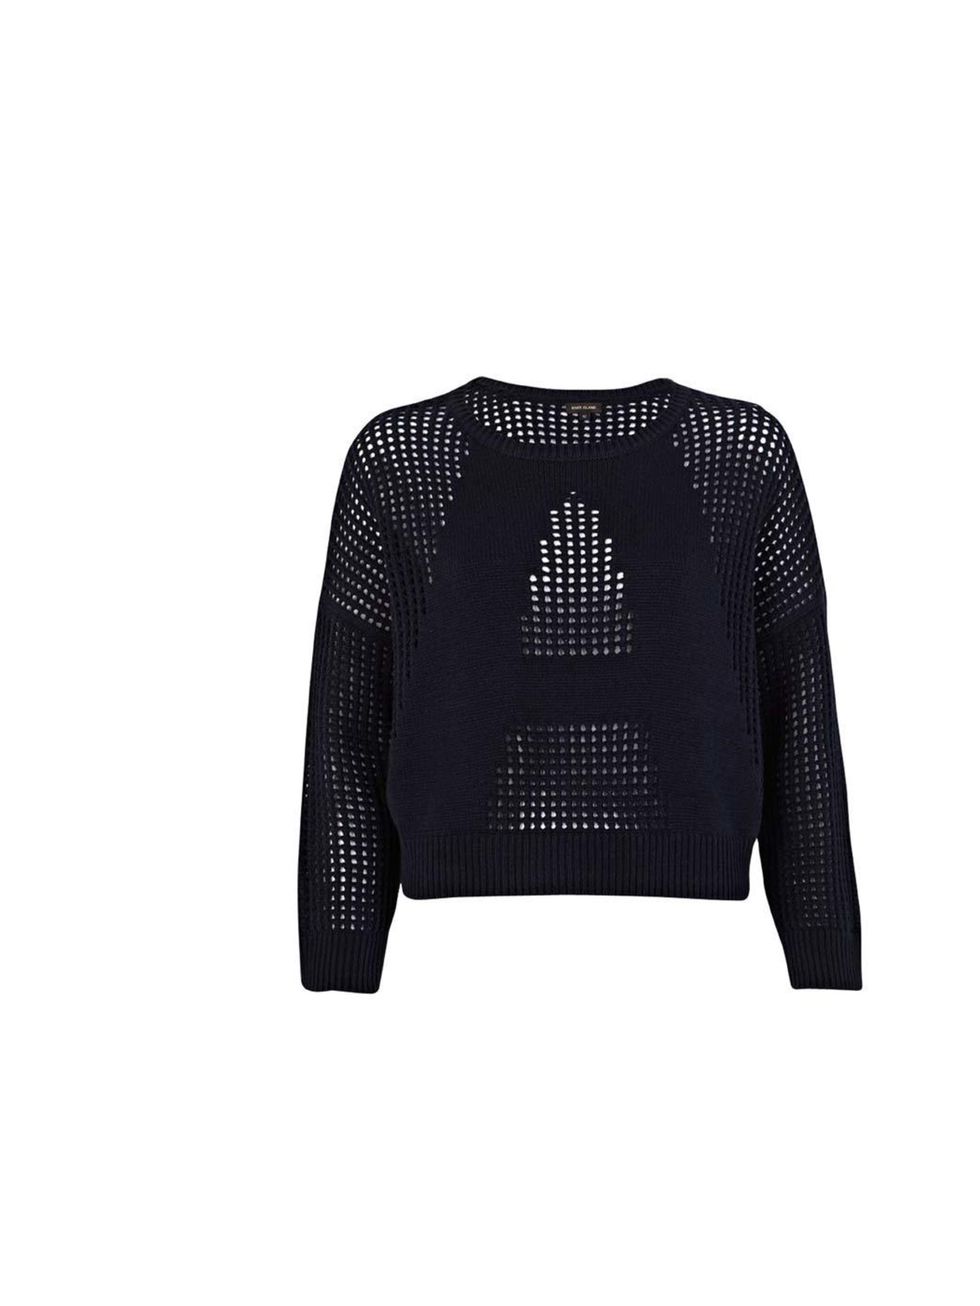 <p>River Island is my go-to for statement pieces that channel the key new season trends.</p><p>- Sarah Bonser, Fashion Assistant</p><p><a href="http://www.riverisland.com/women/knitwear/jumpers/Navy-mesh-panel-cropped-jumper-636308">River Island</a> jumpe